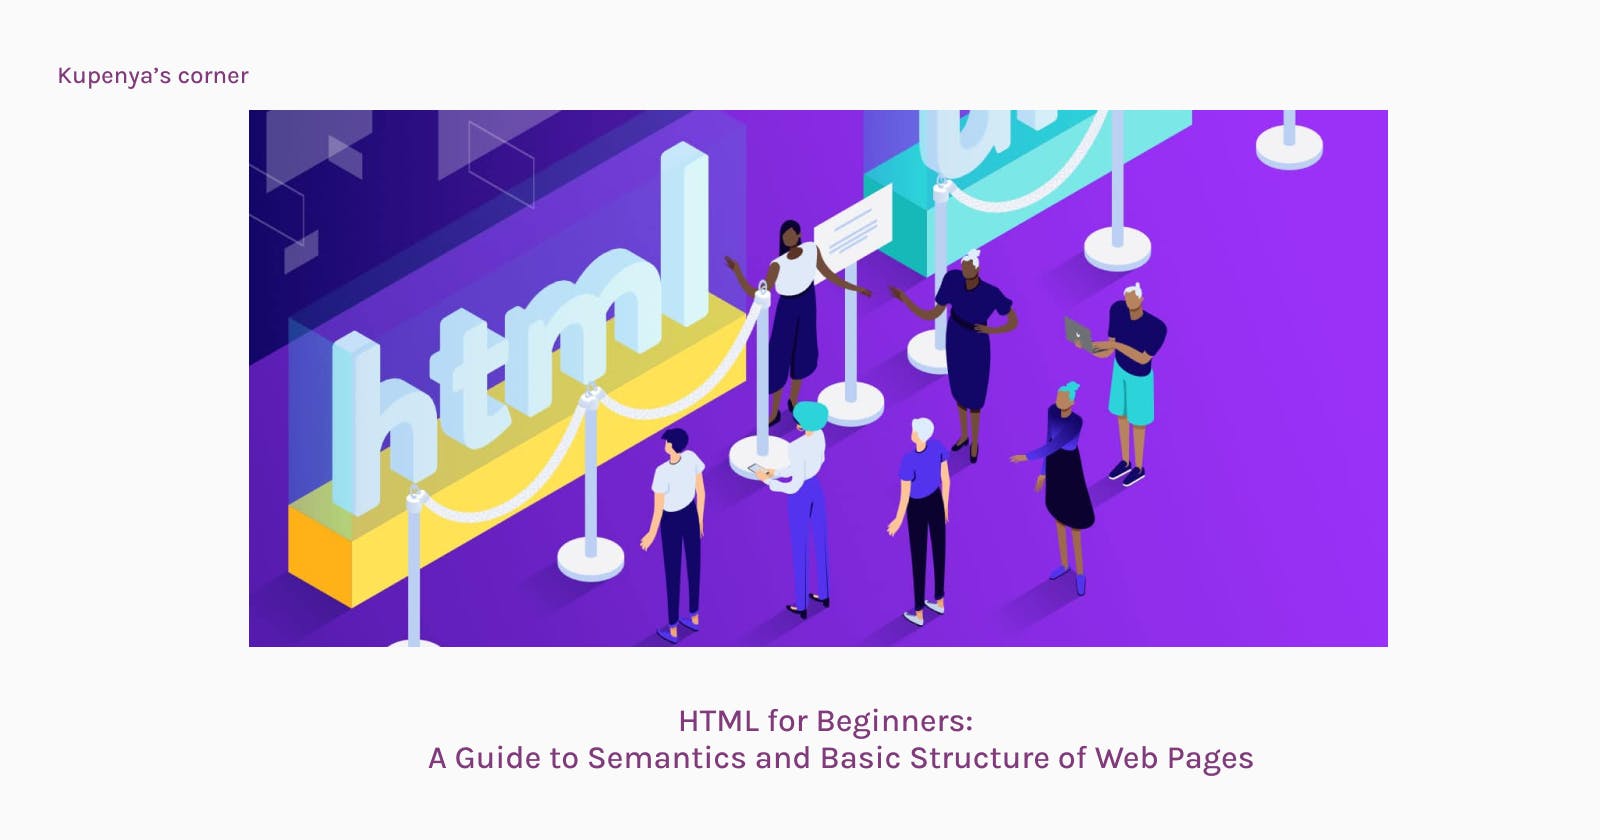 HTML for Beginners: A Guide to Semantics and Basic Structure of Web Pages